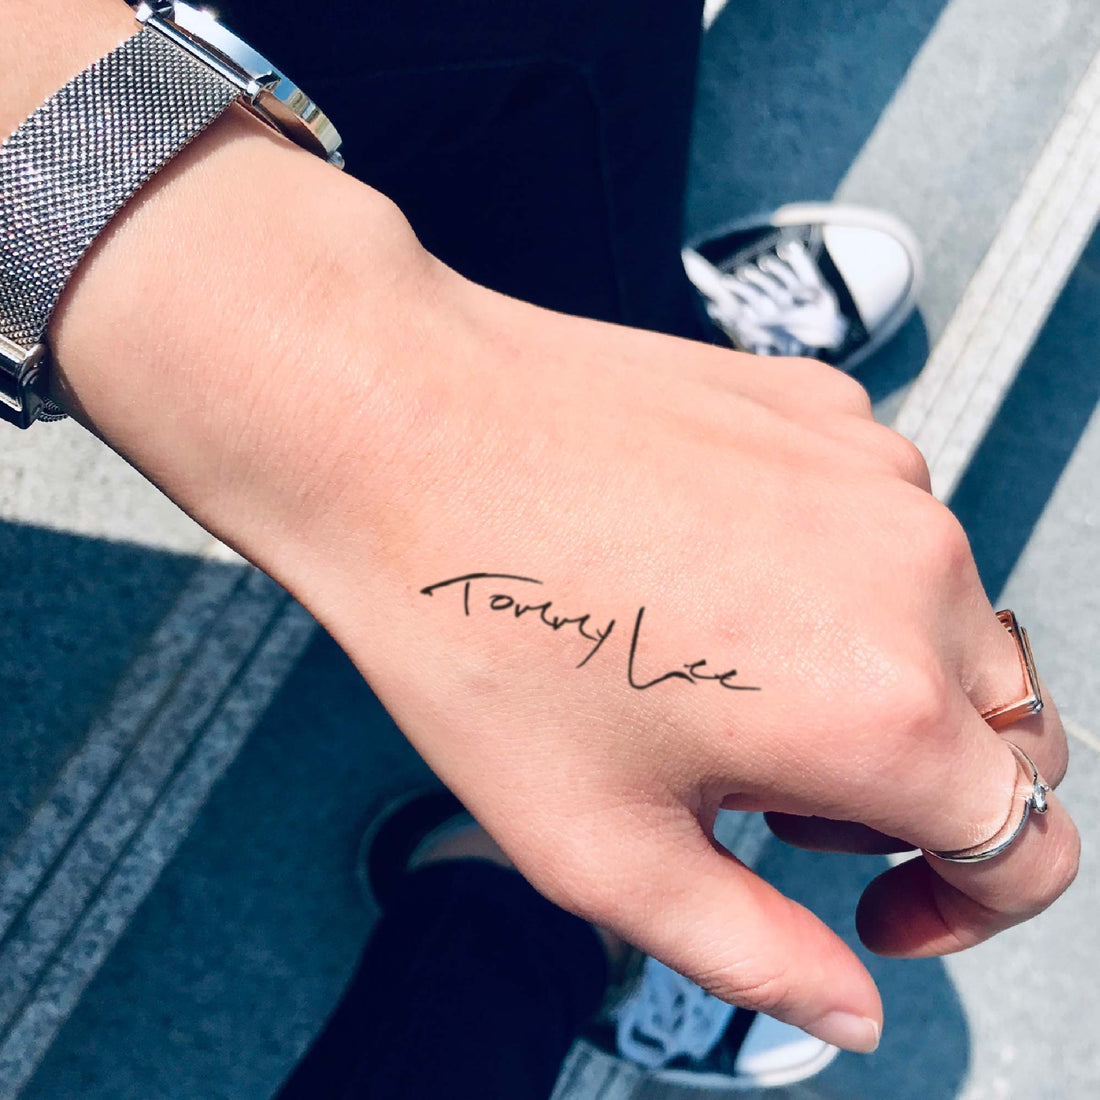 Tommy Lee custom temporary tattoo sticker design idea inspiration meanings removal arm wrist hand words font name signature calligraphy lyrics tour concert outfits merch accessory gift souvenir costumes wear dress up code